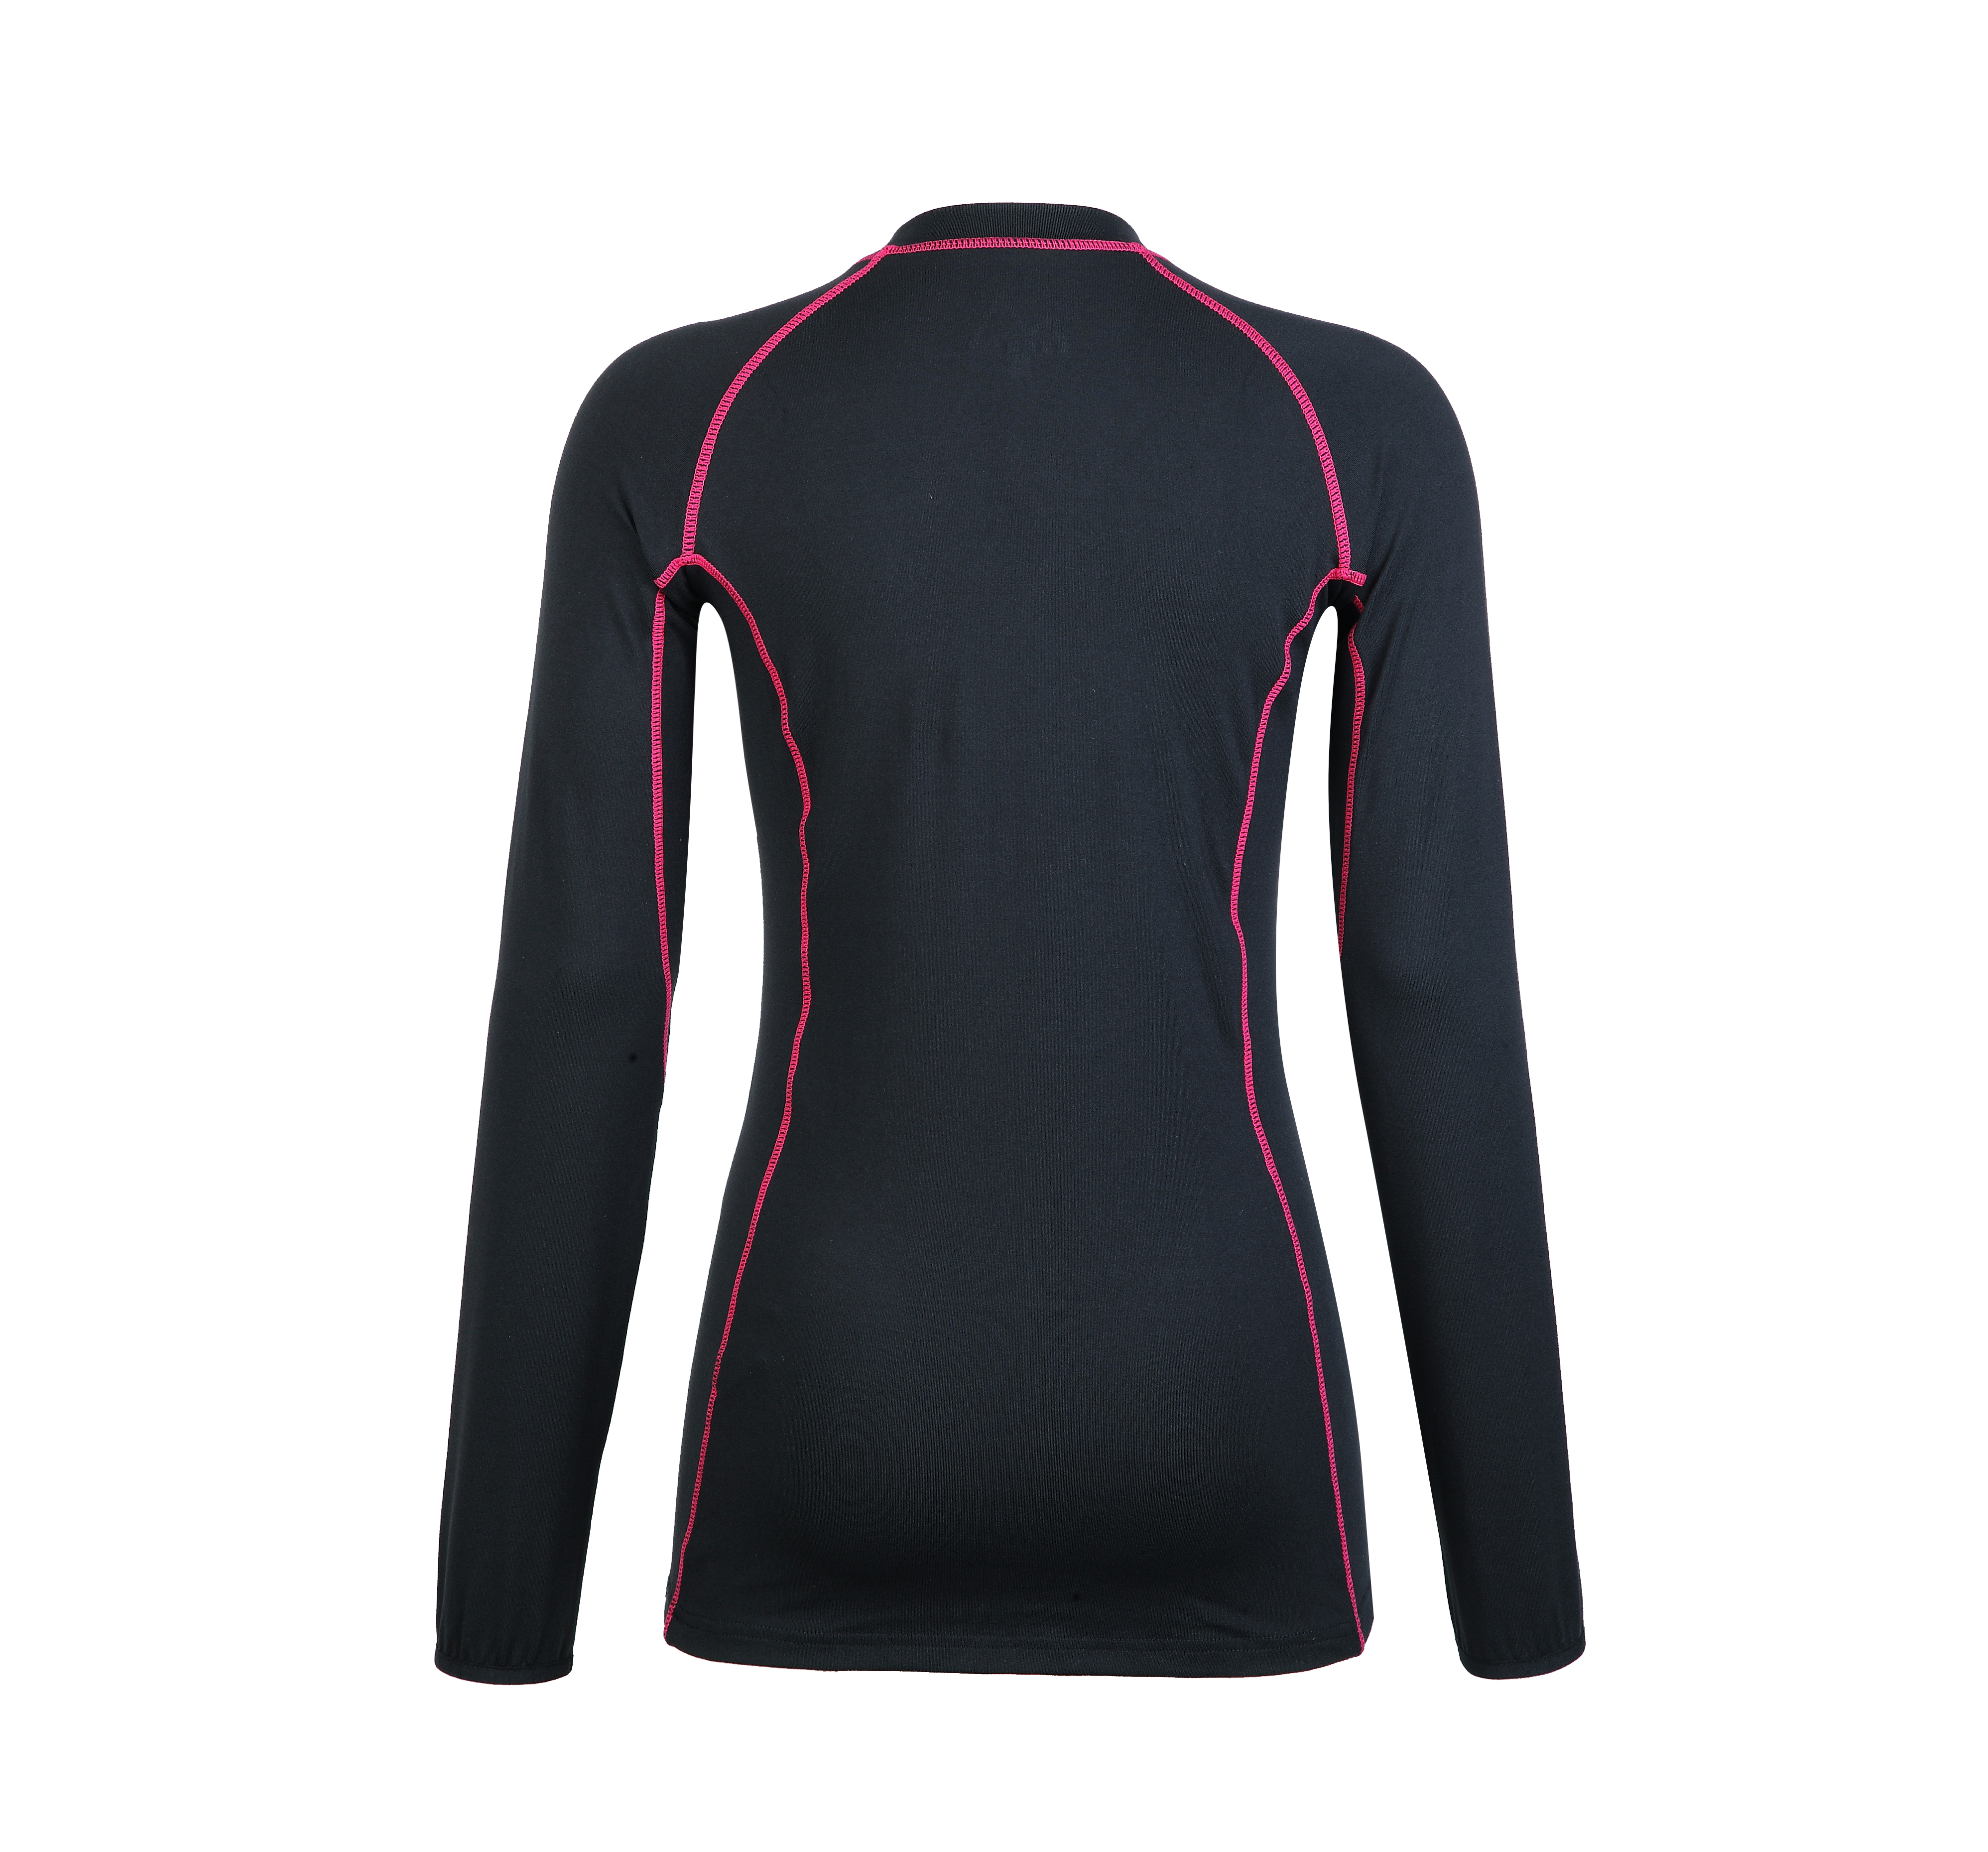 Women’s knitted flat lock compression top.